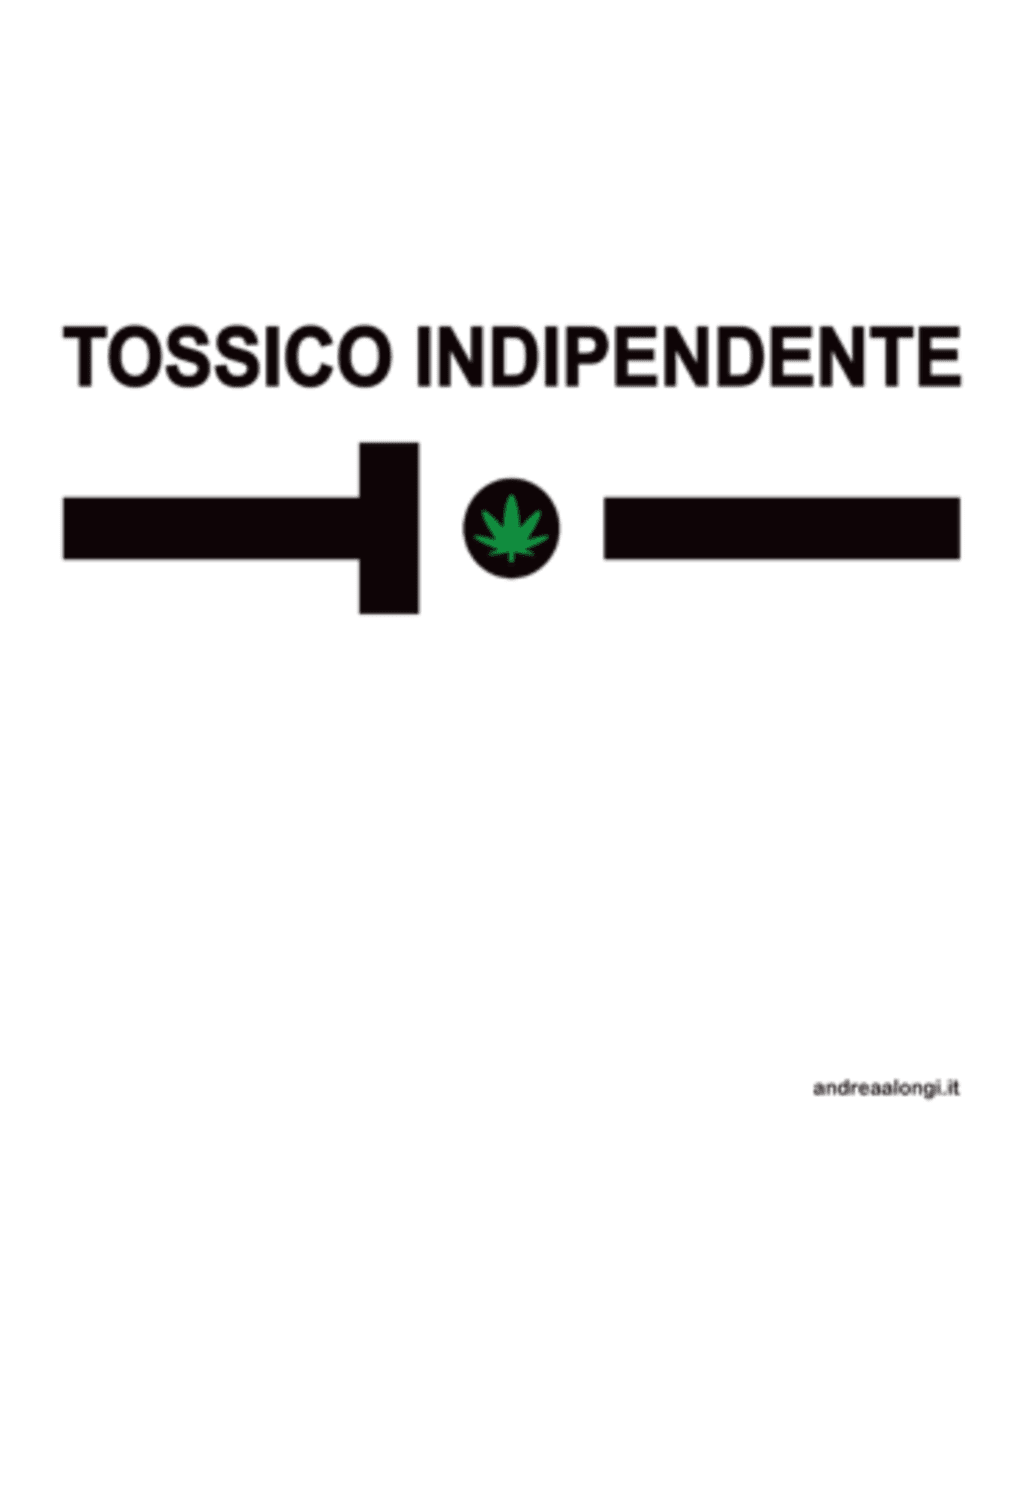 Tossico indipendente! (light colors)